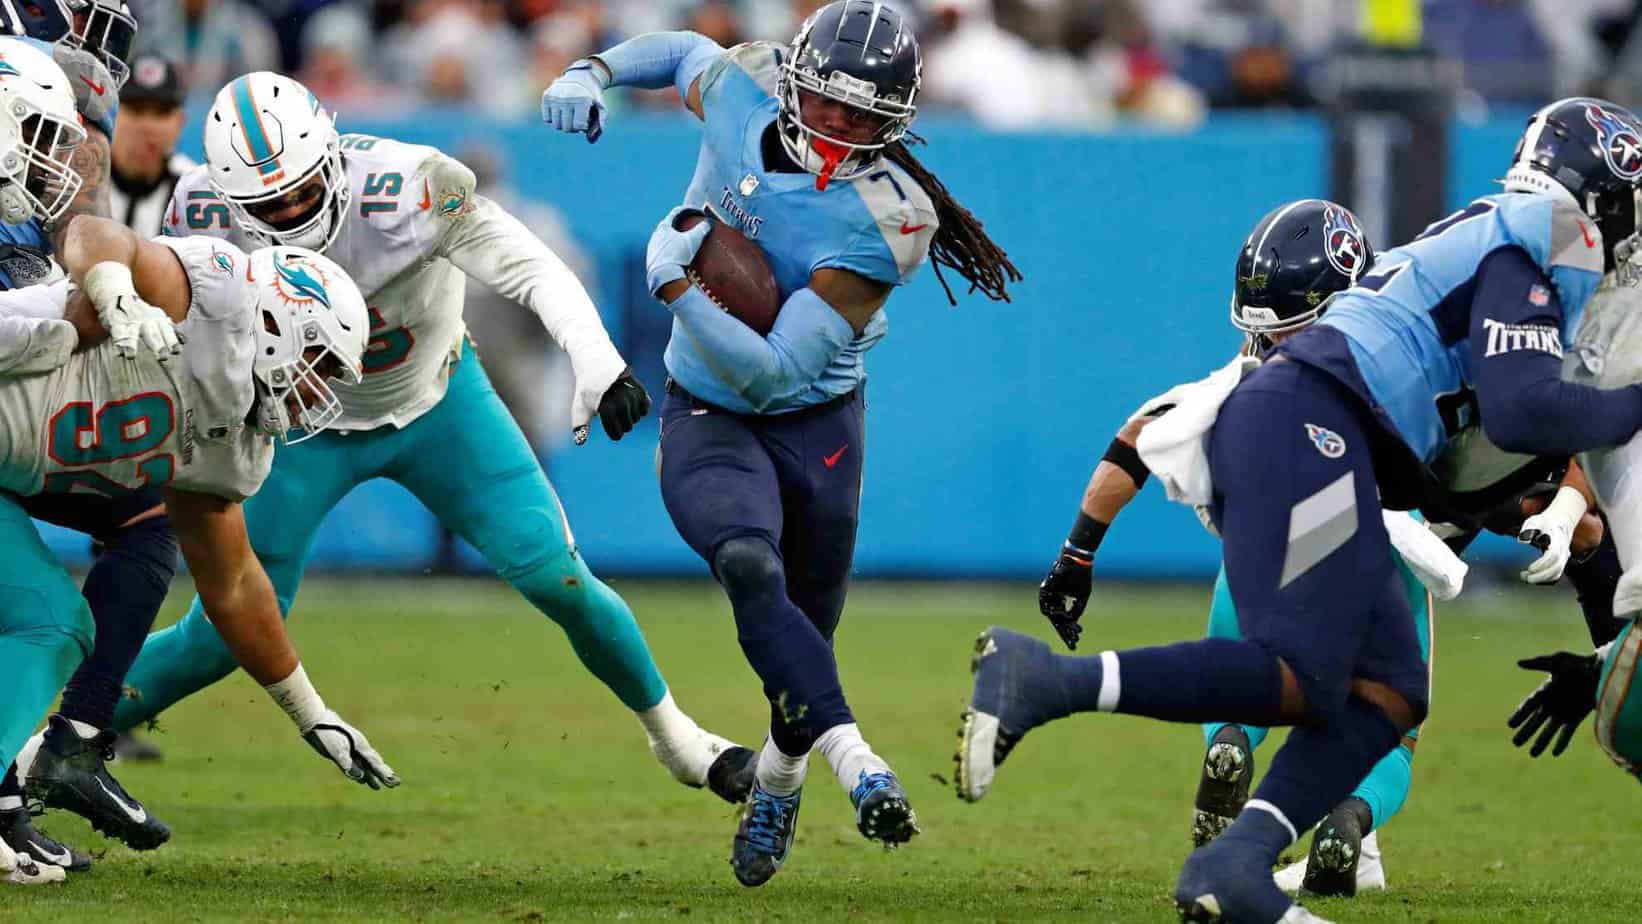 Titans at Dolphins for MNF: Preview and Betting Odds